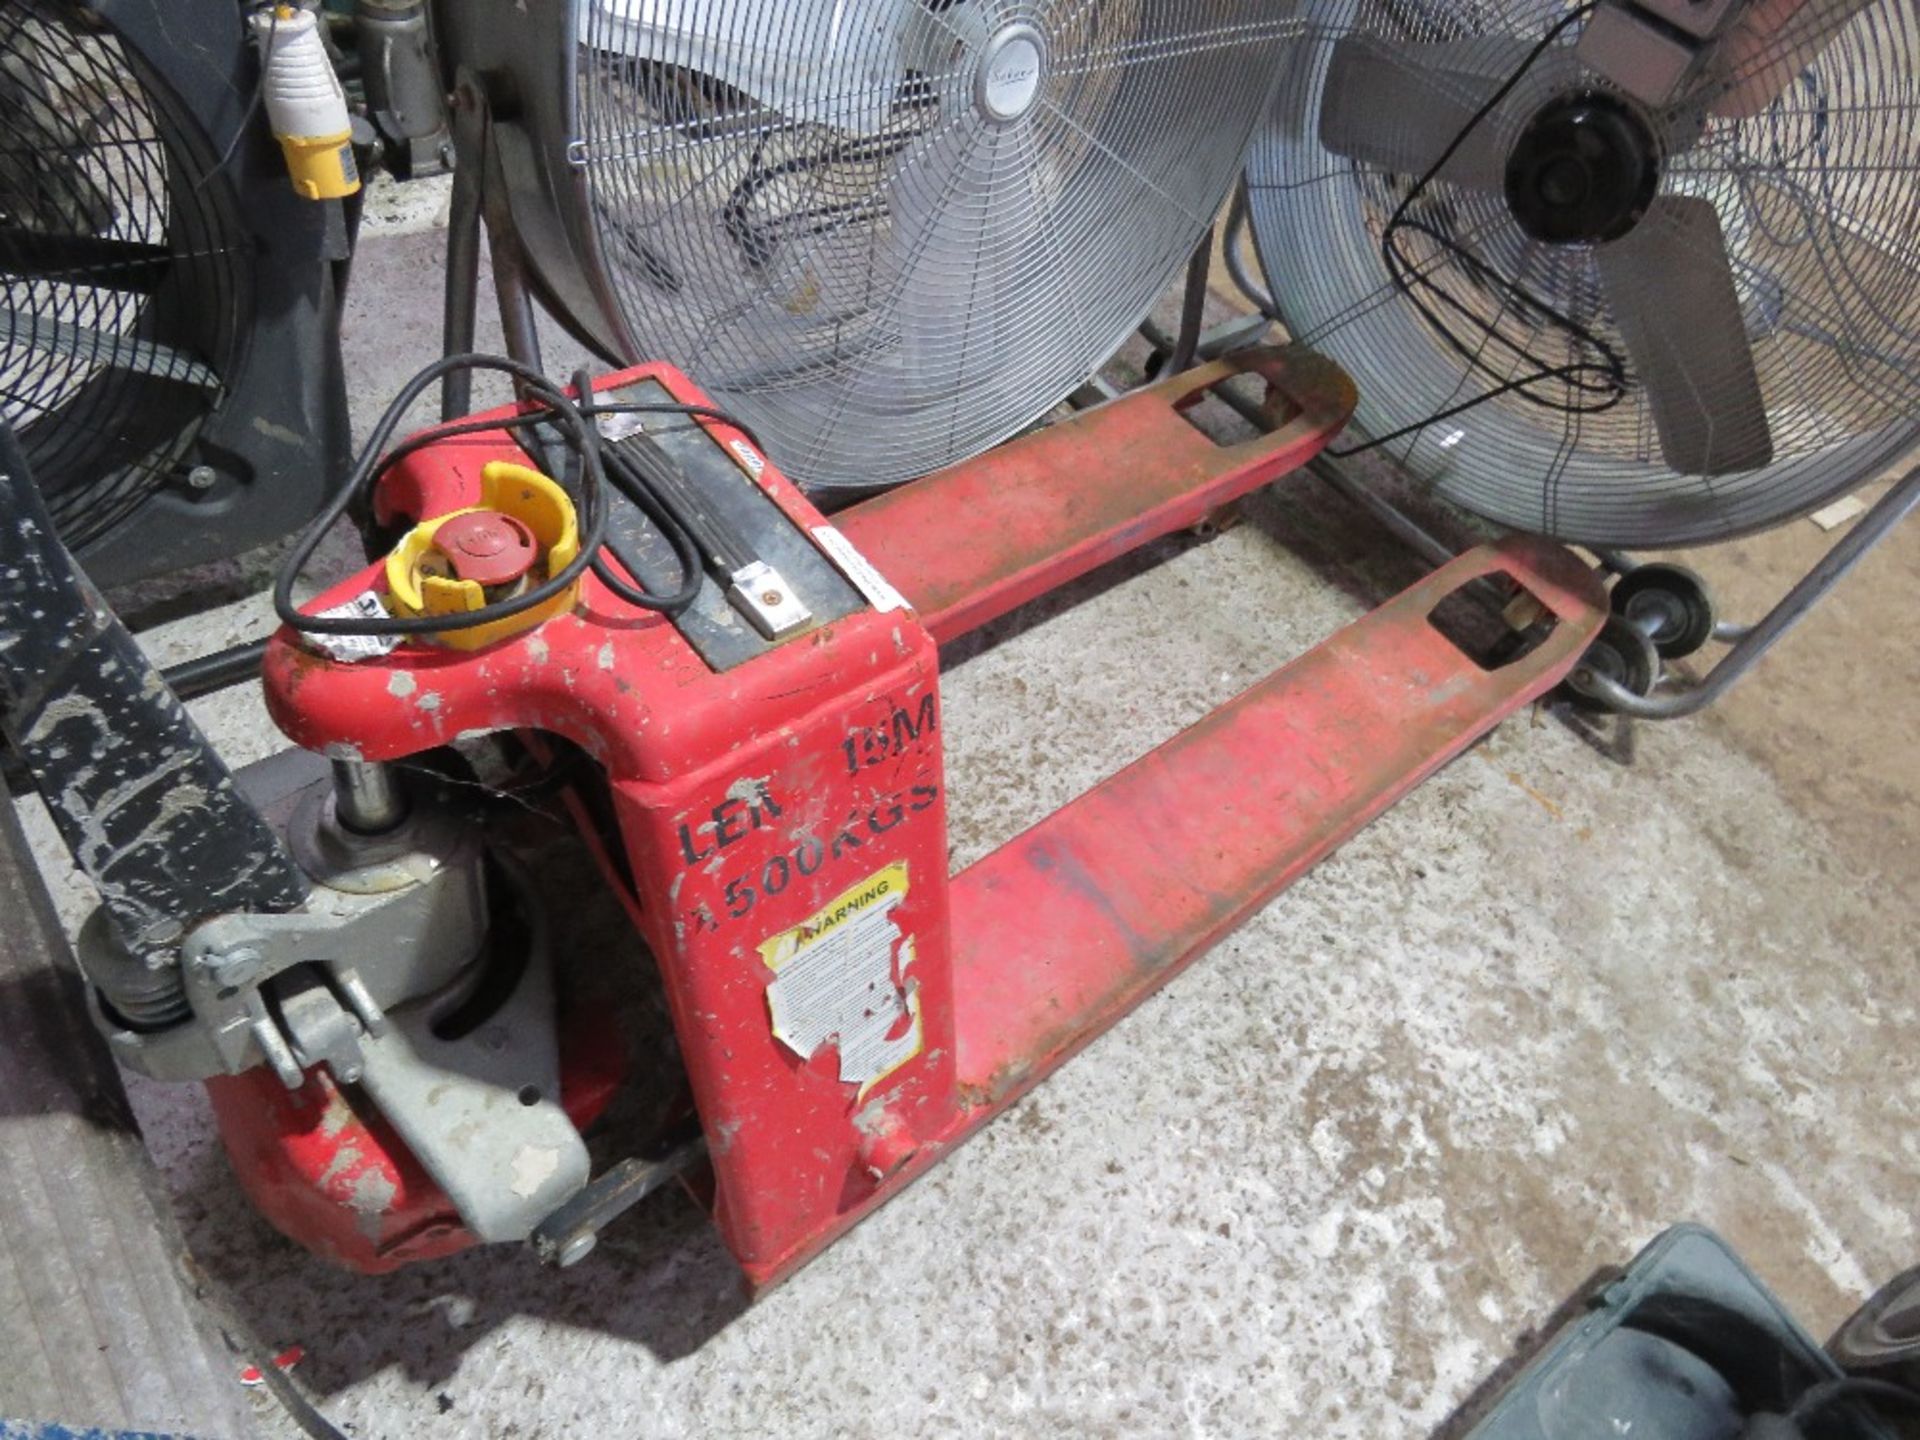 BATTERY POWERED PALLET TRUCK. WHEN TESTED WAS SEEN TO LIFT, LOWER AND DRIVE. WITH A CHARGER. - Image 2 of 6